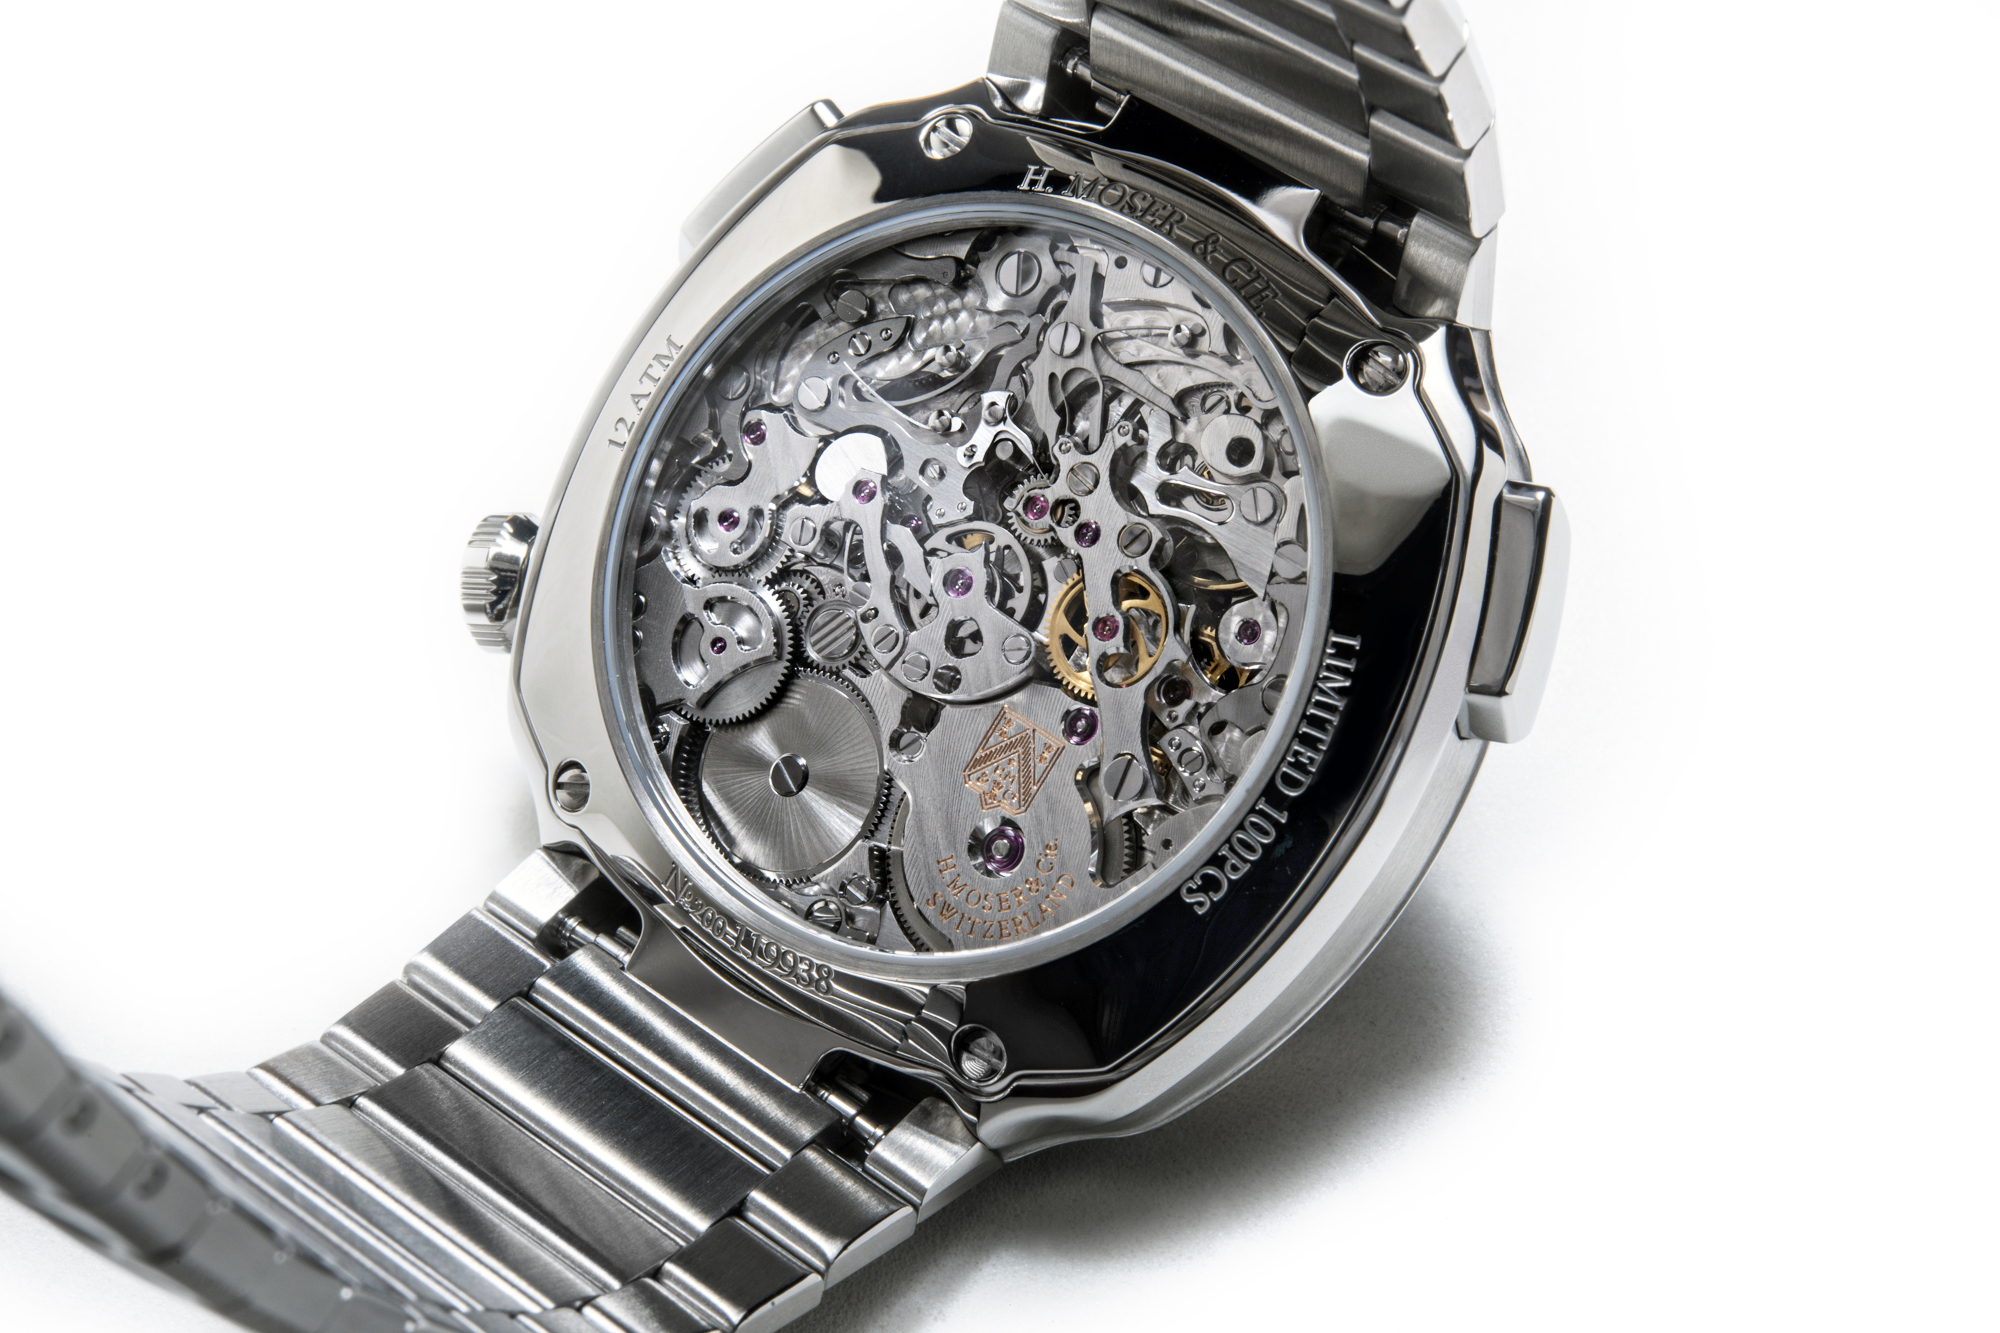 H Moser & Cie Streamliner Flyback Chronograph movement